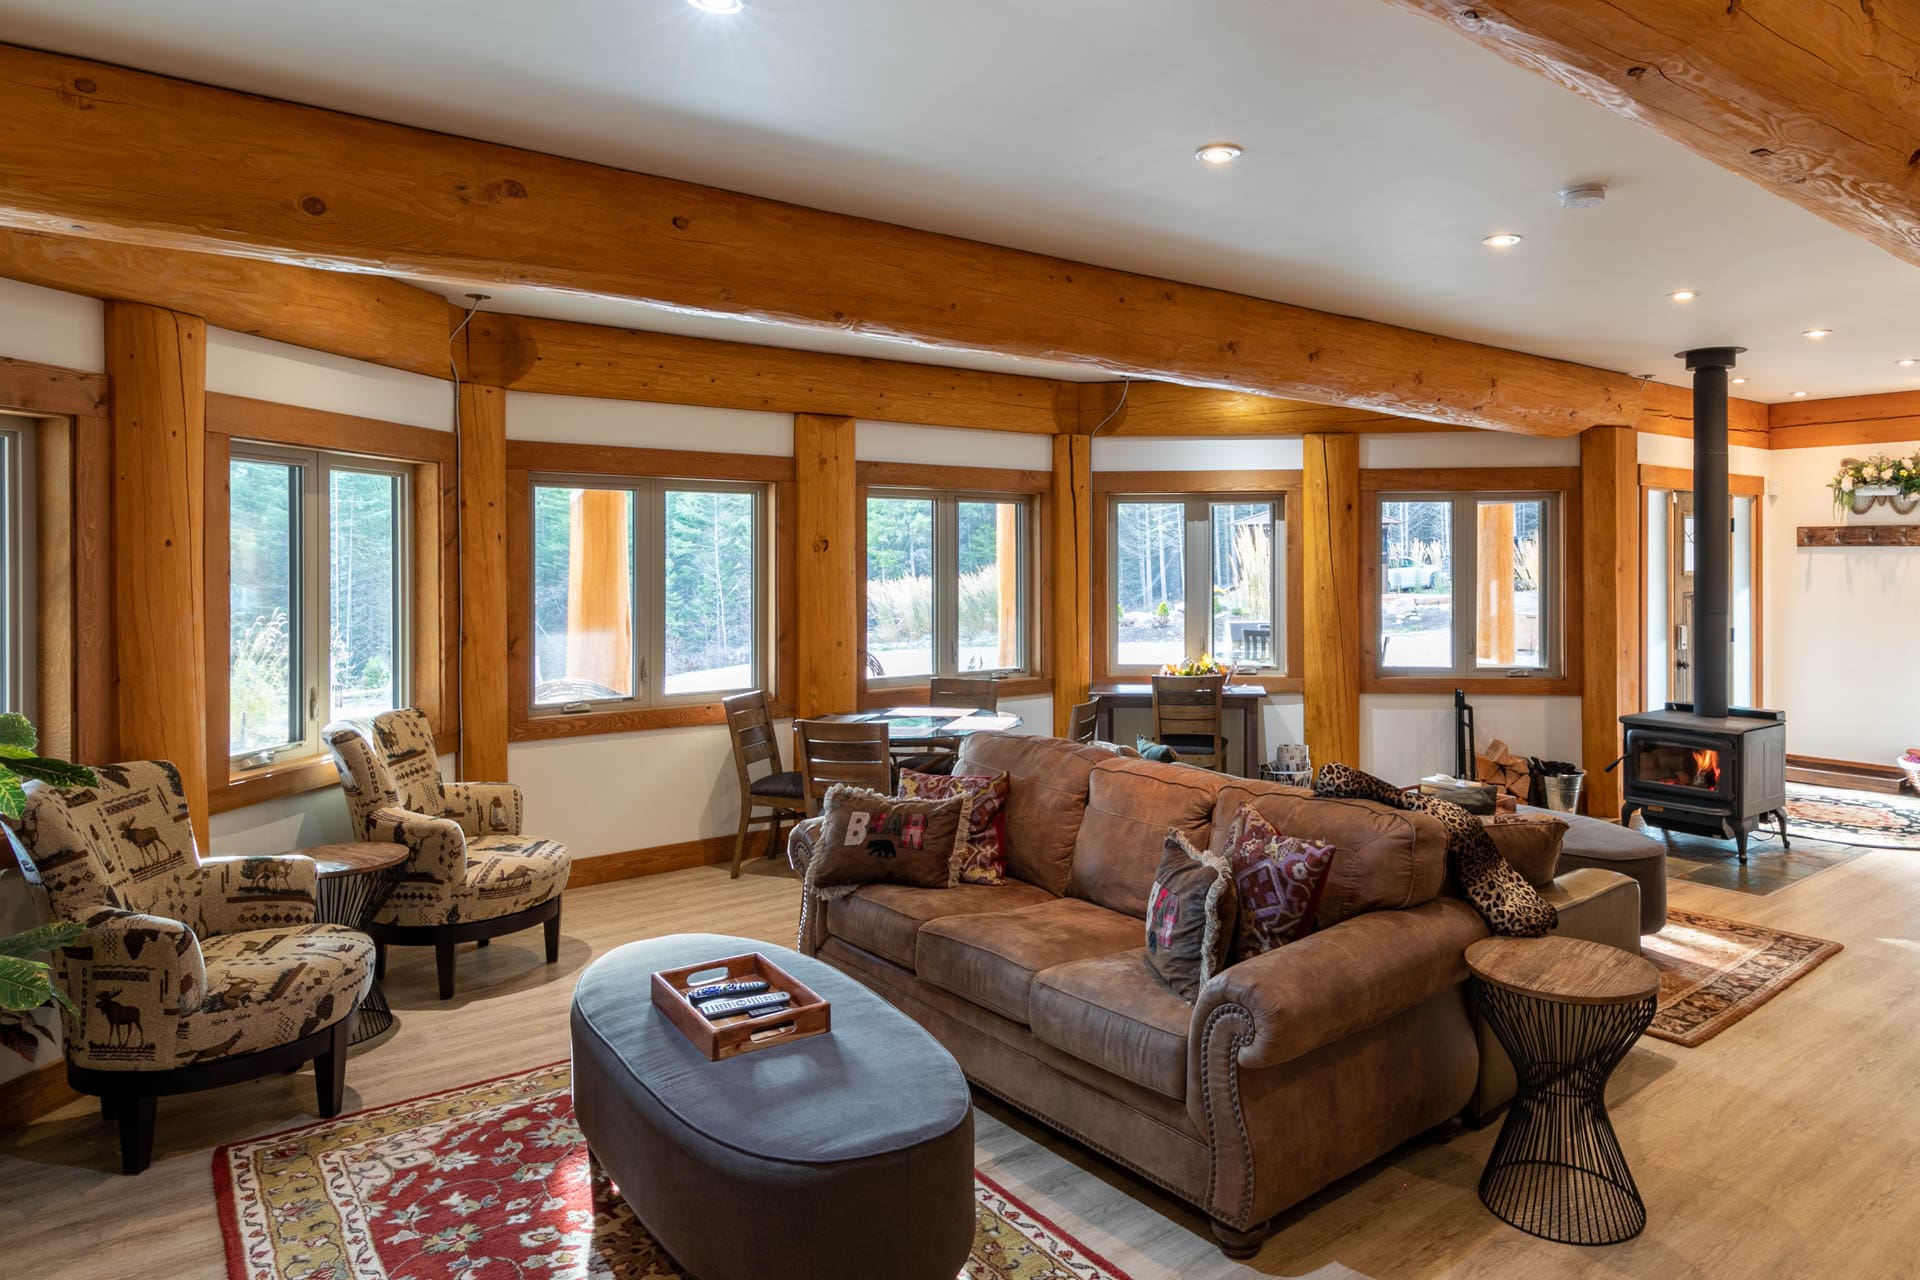 Timber Frame post and beam log home living area with fireplace.